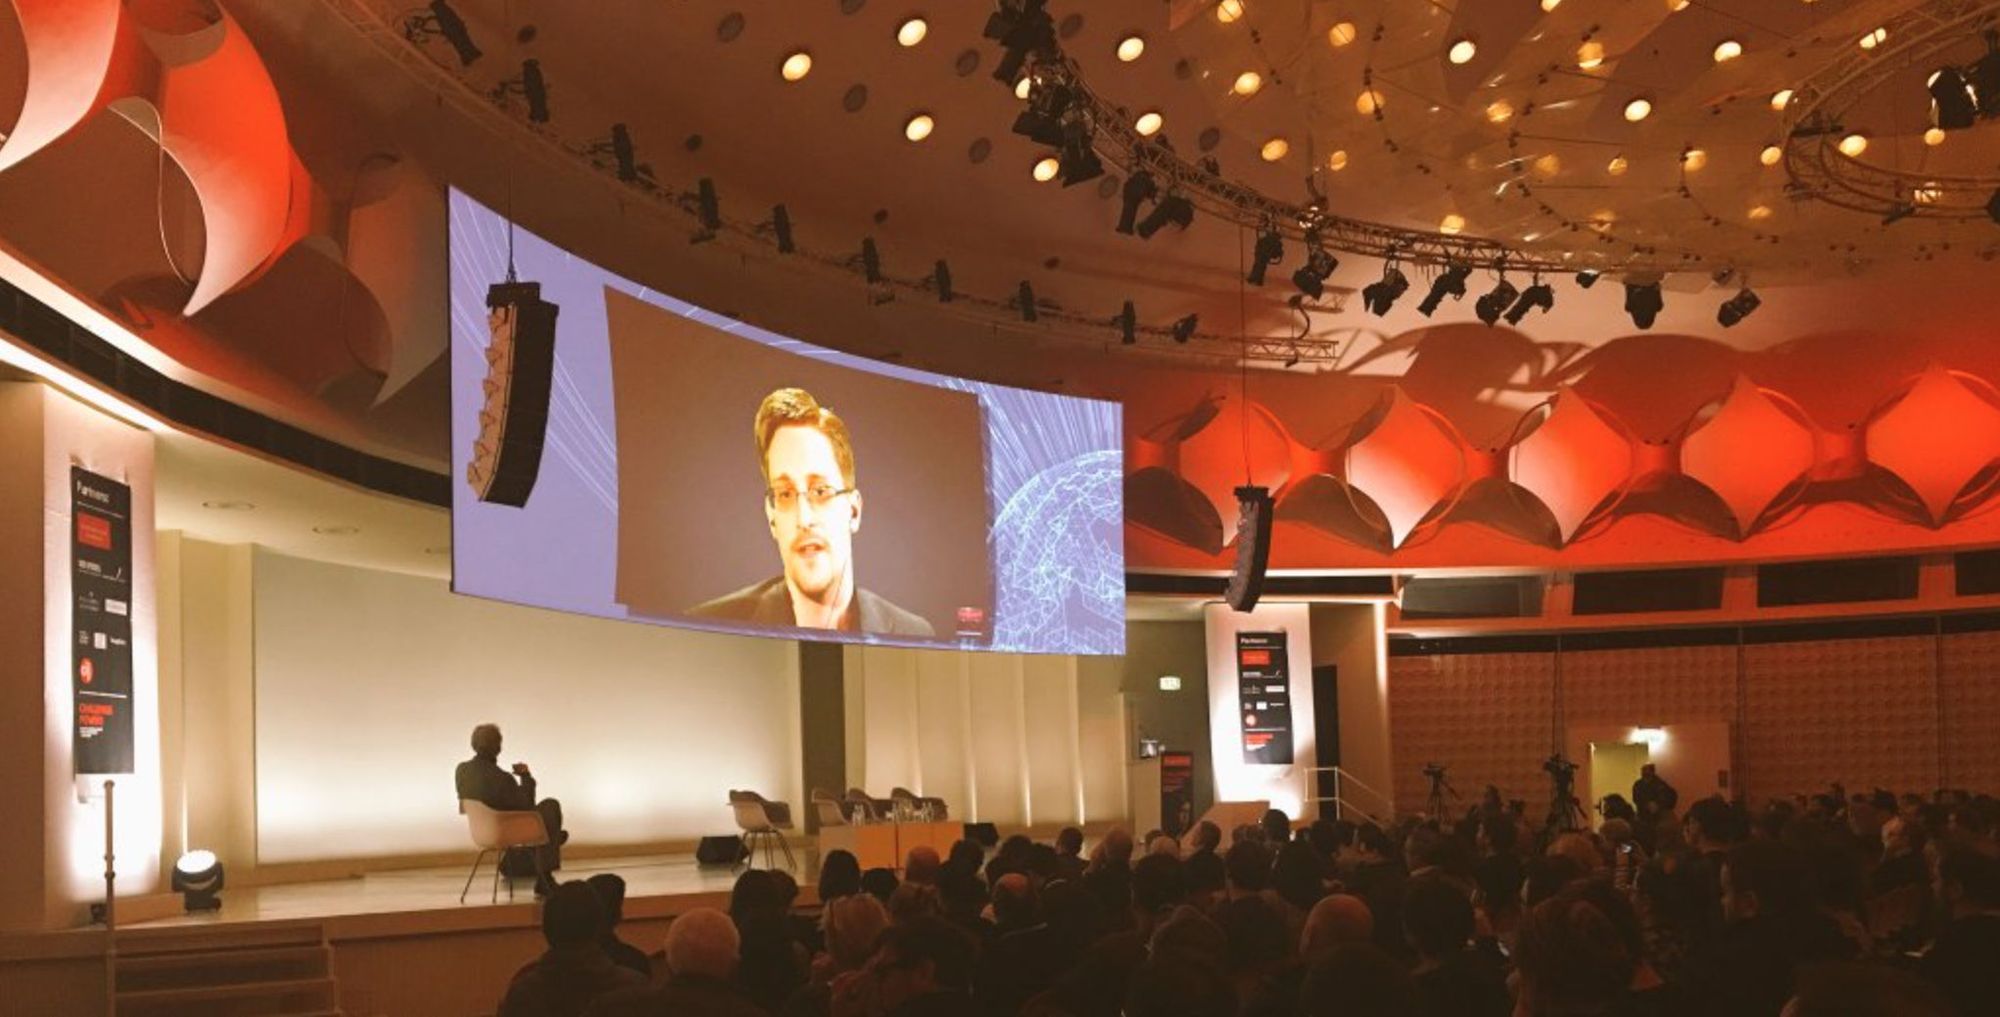 Edward Snowden: ‘we must seize the means of communication’ to protect basic freedoms